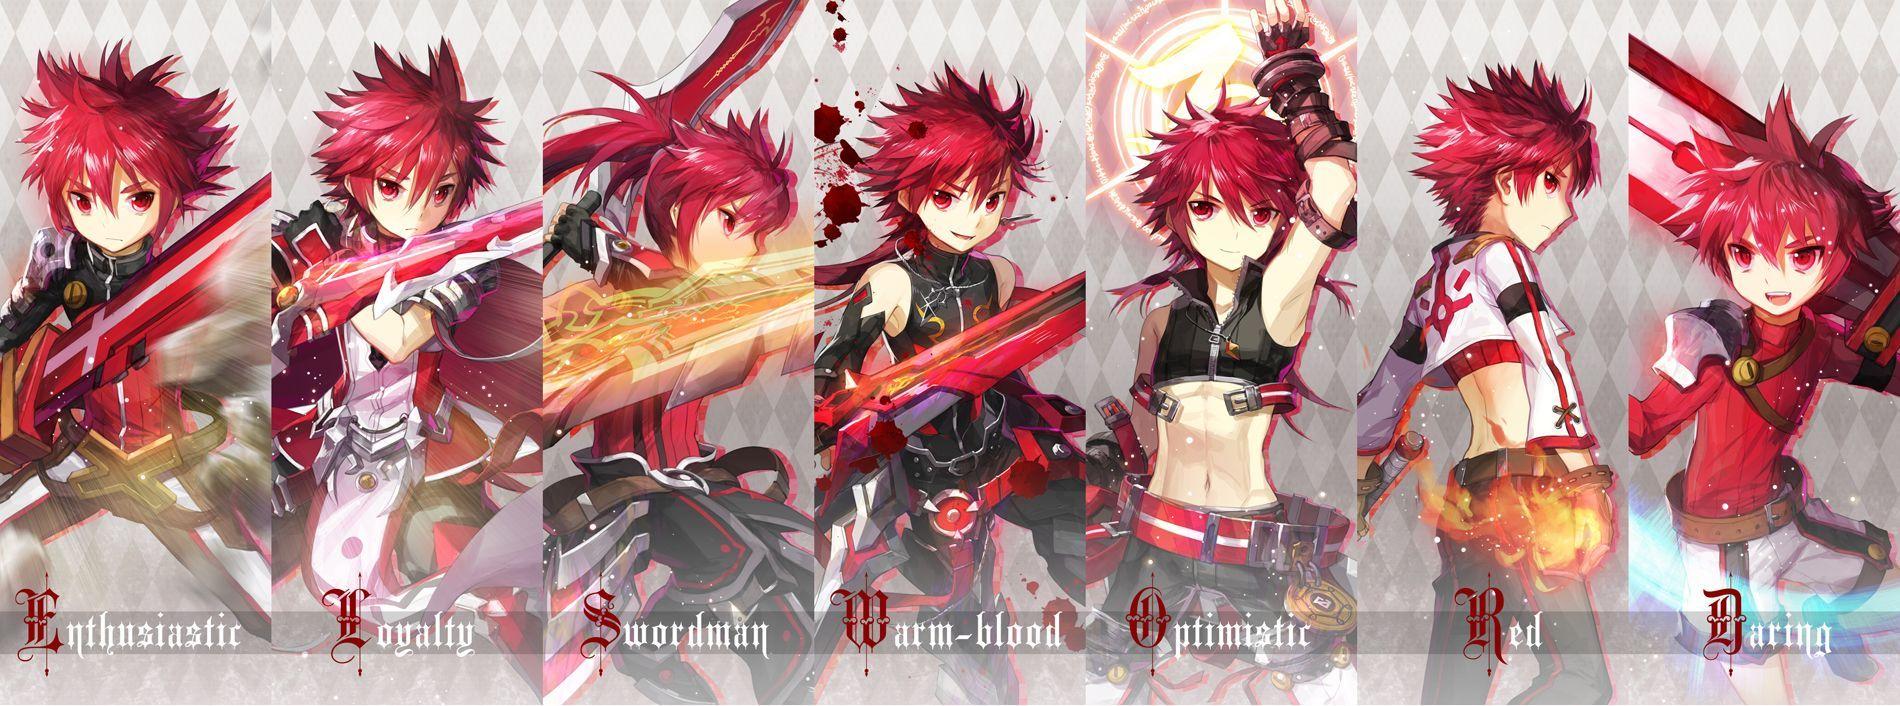 Tags: Pixiv, Elsword, Elsword (Character), Pixiv Id Lord